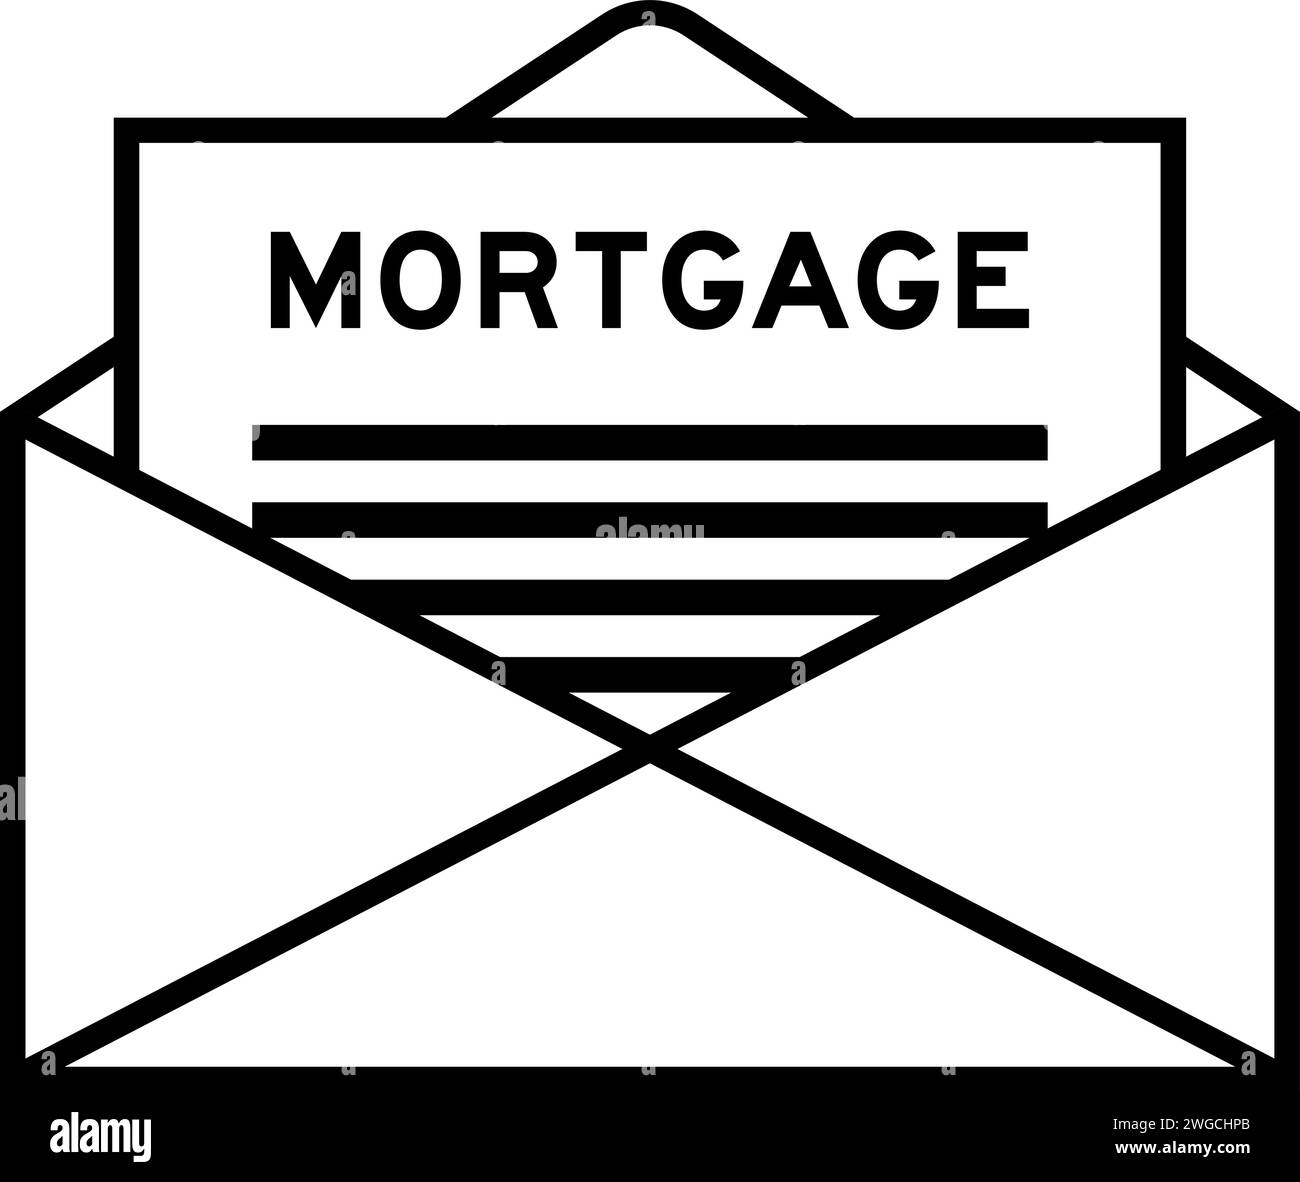 Envelope and letter sign with word mortgage as the headline Stock Vector